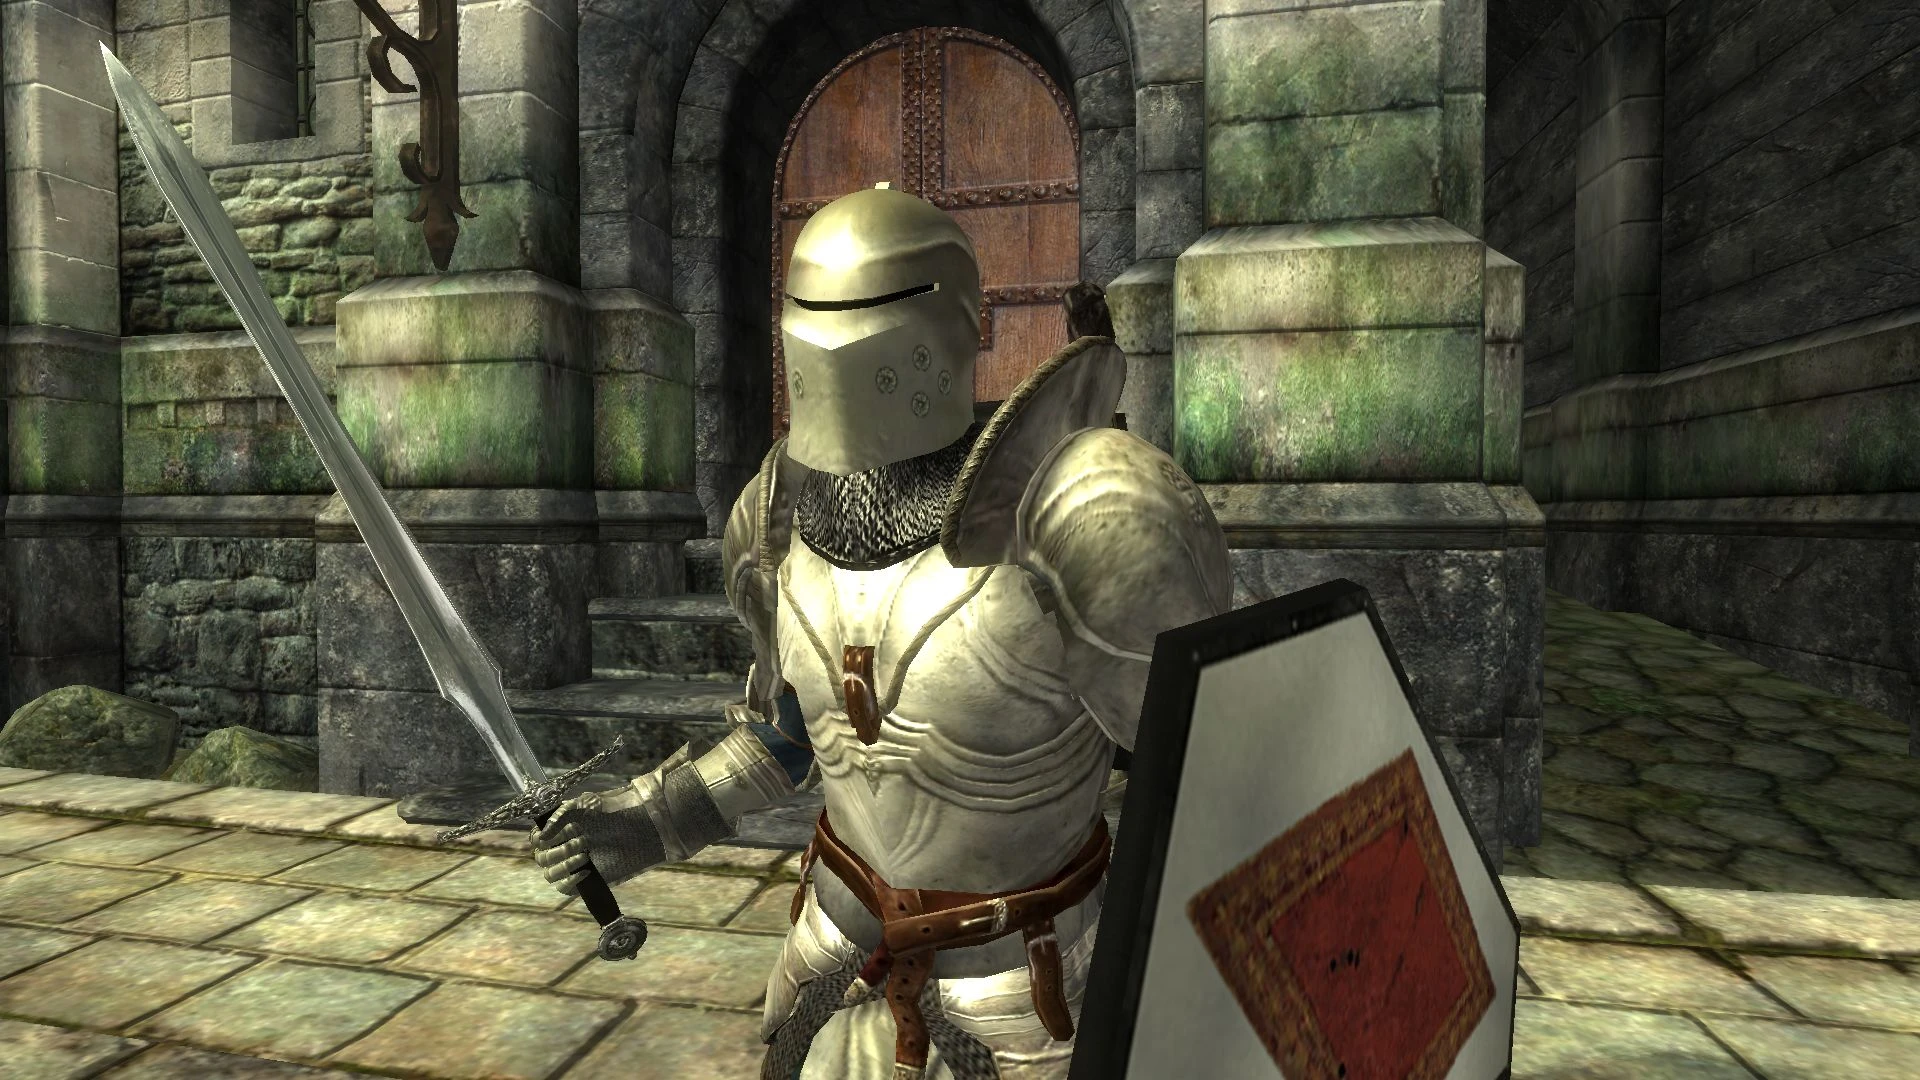 dread knight armor and weapons at oblivion nexus mods.